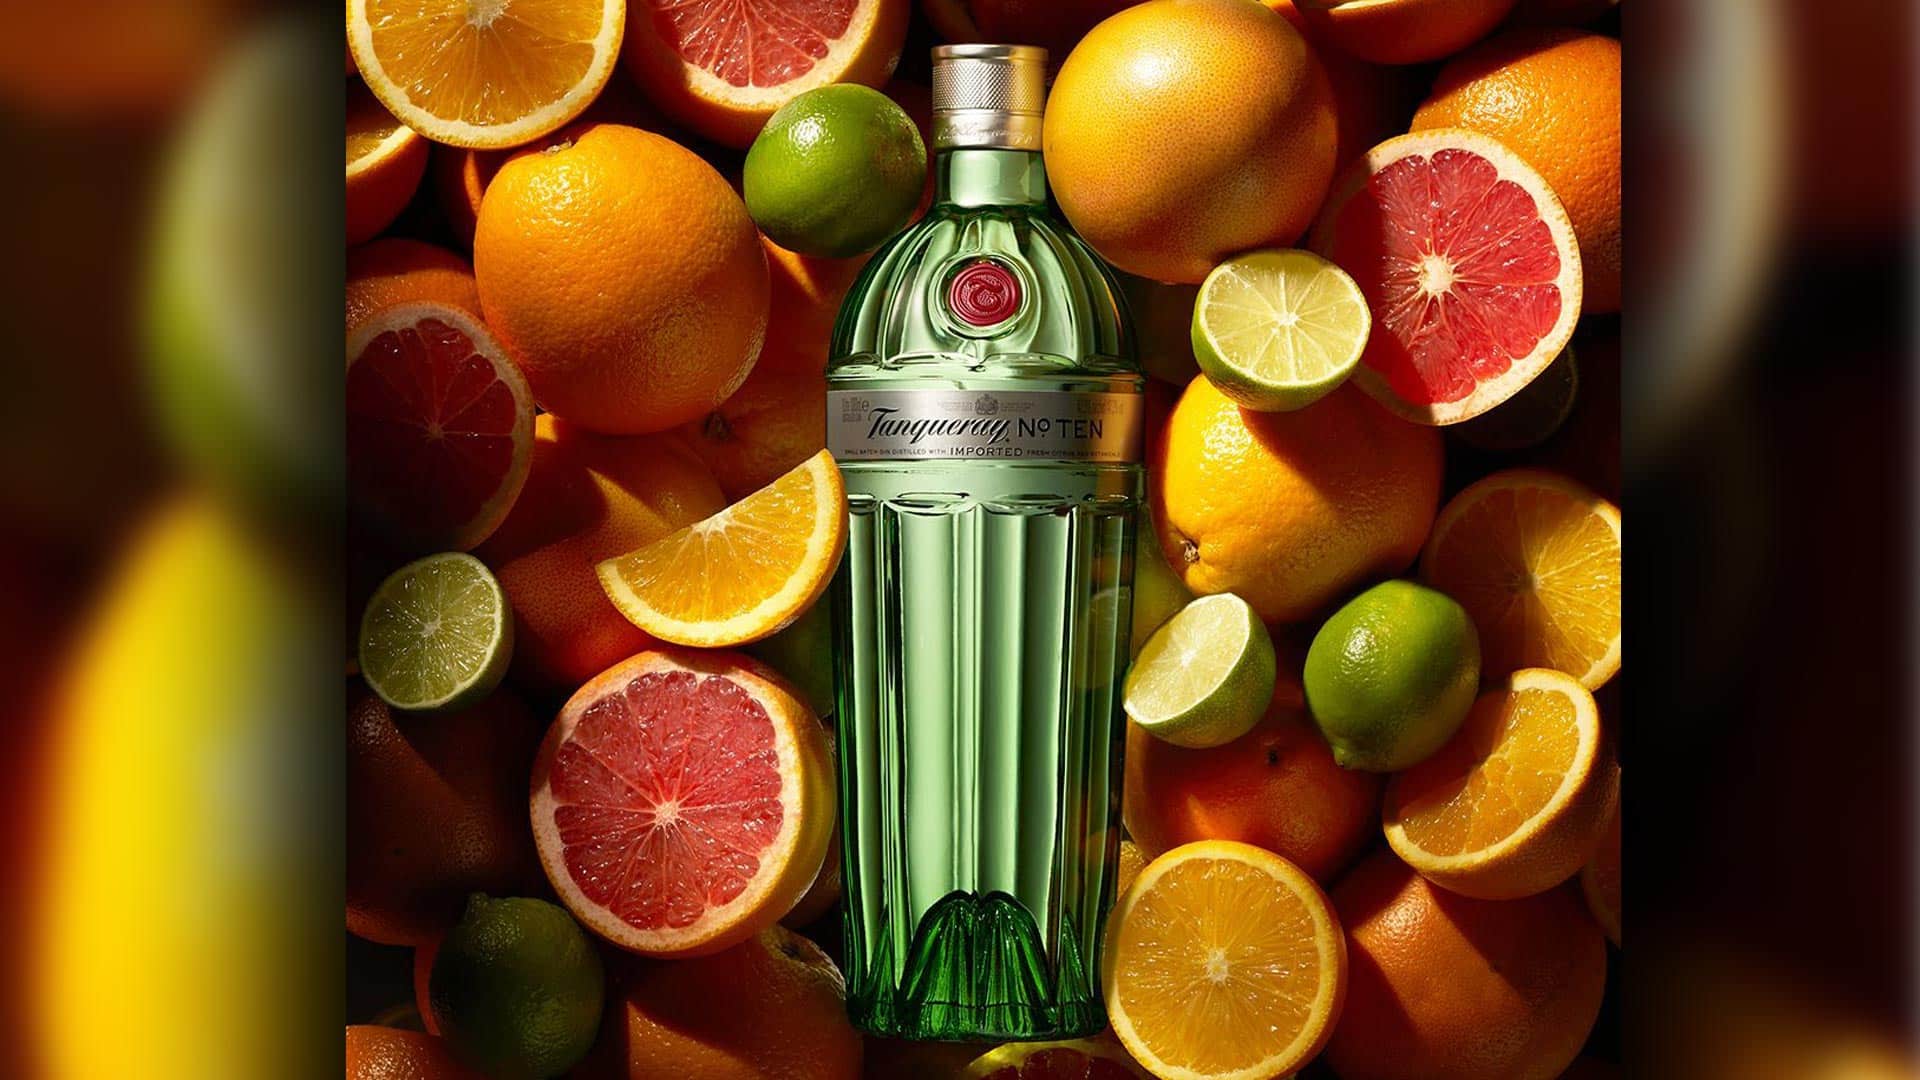 What Ingredients Are Used In Tanqueray Gin